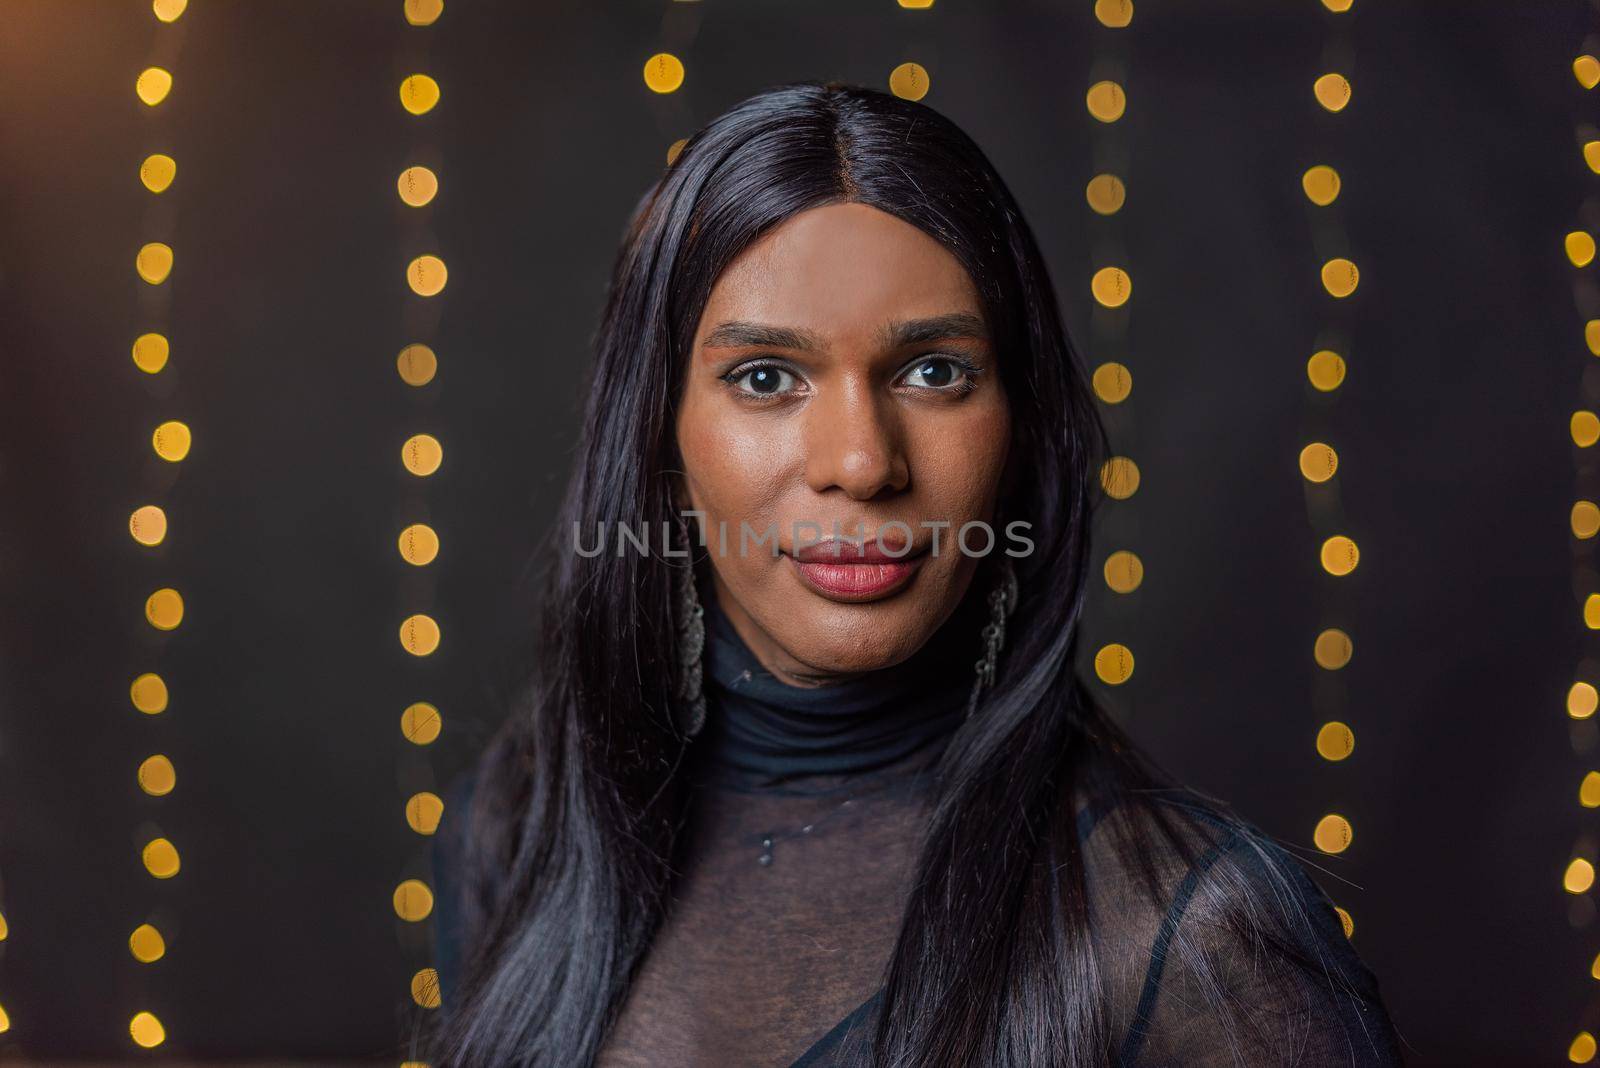 A transgender person looking at camera with blurred light background by ivanmoreno